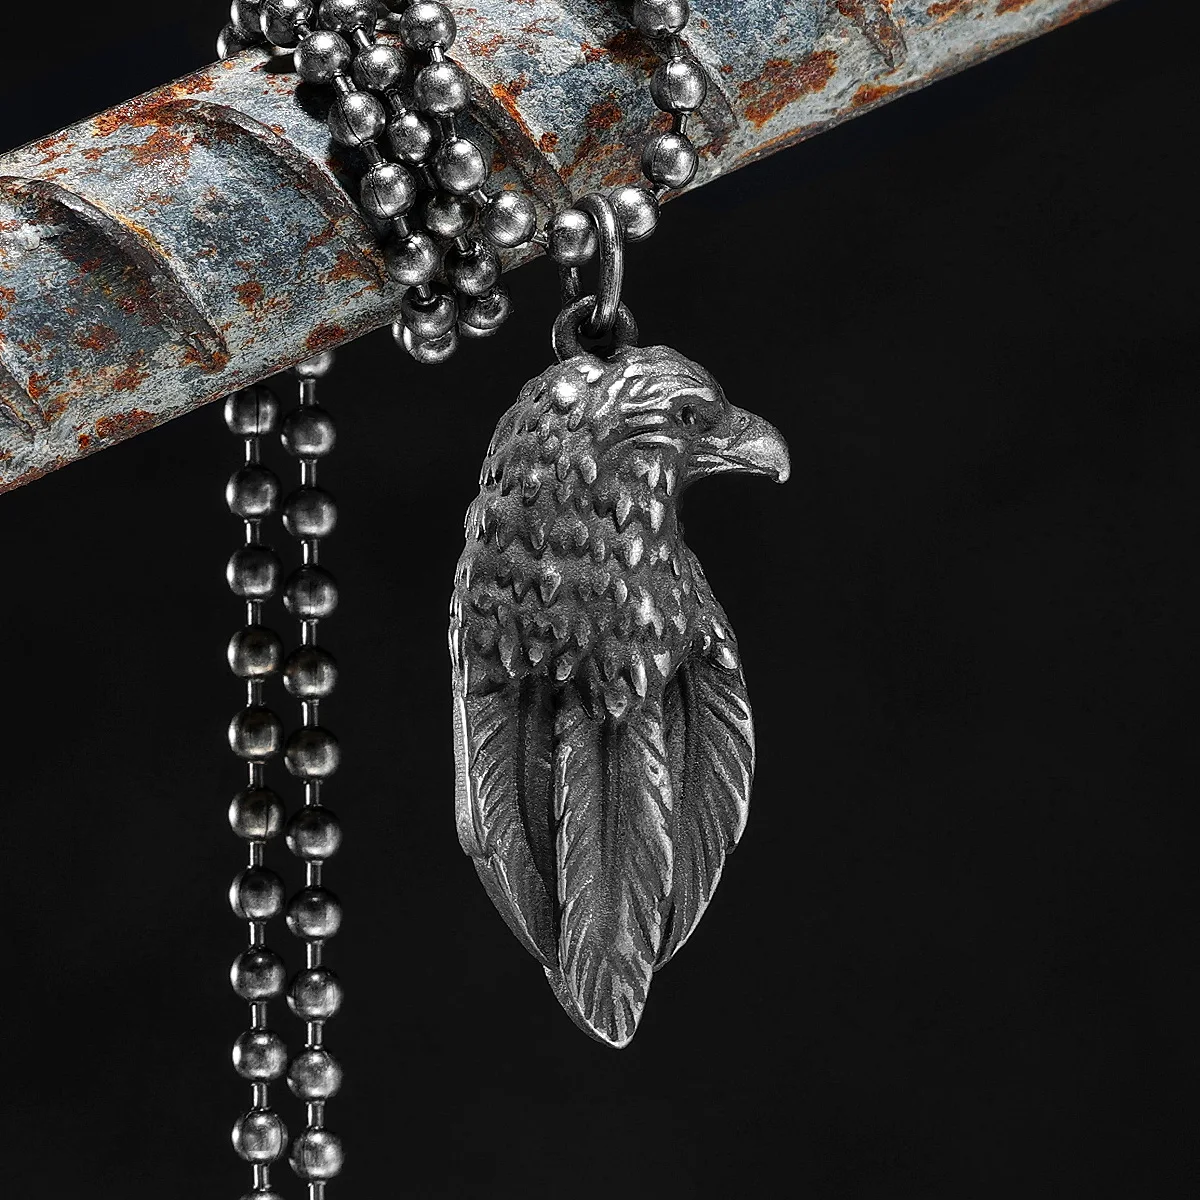 Retro Eagle Pendant Men Feather Necklace 316L Stainless Steel Chain Punk Rock Jewelry for Male Biker Gift Accessories Wholesale